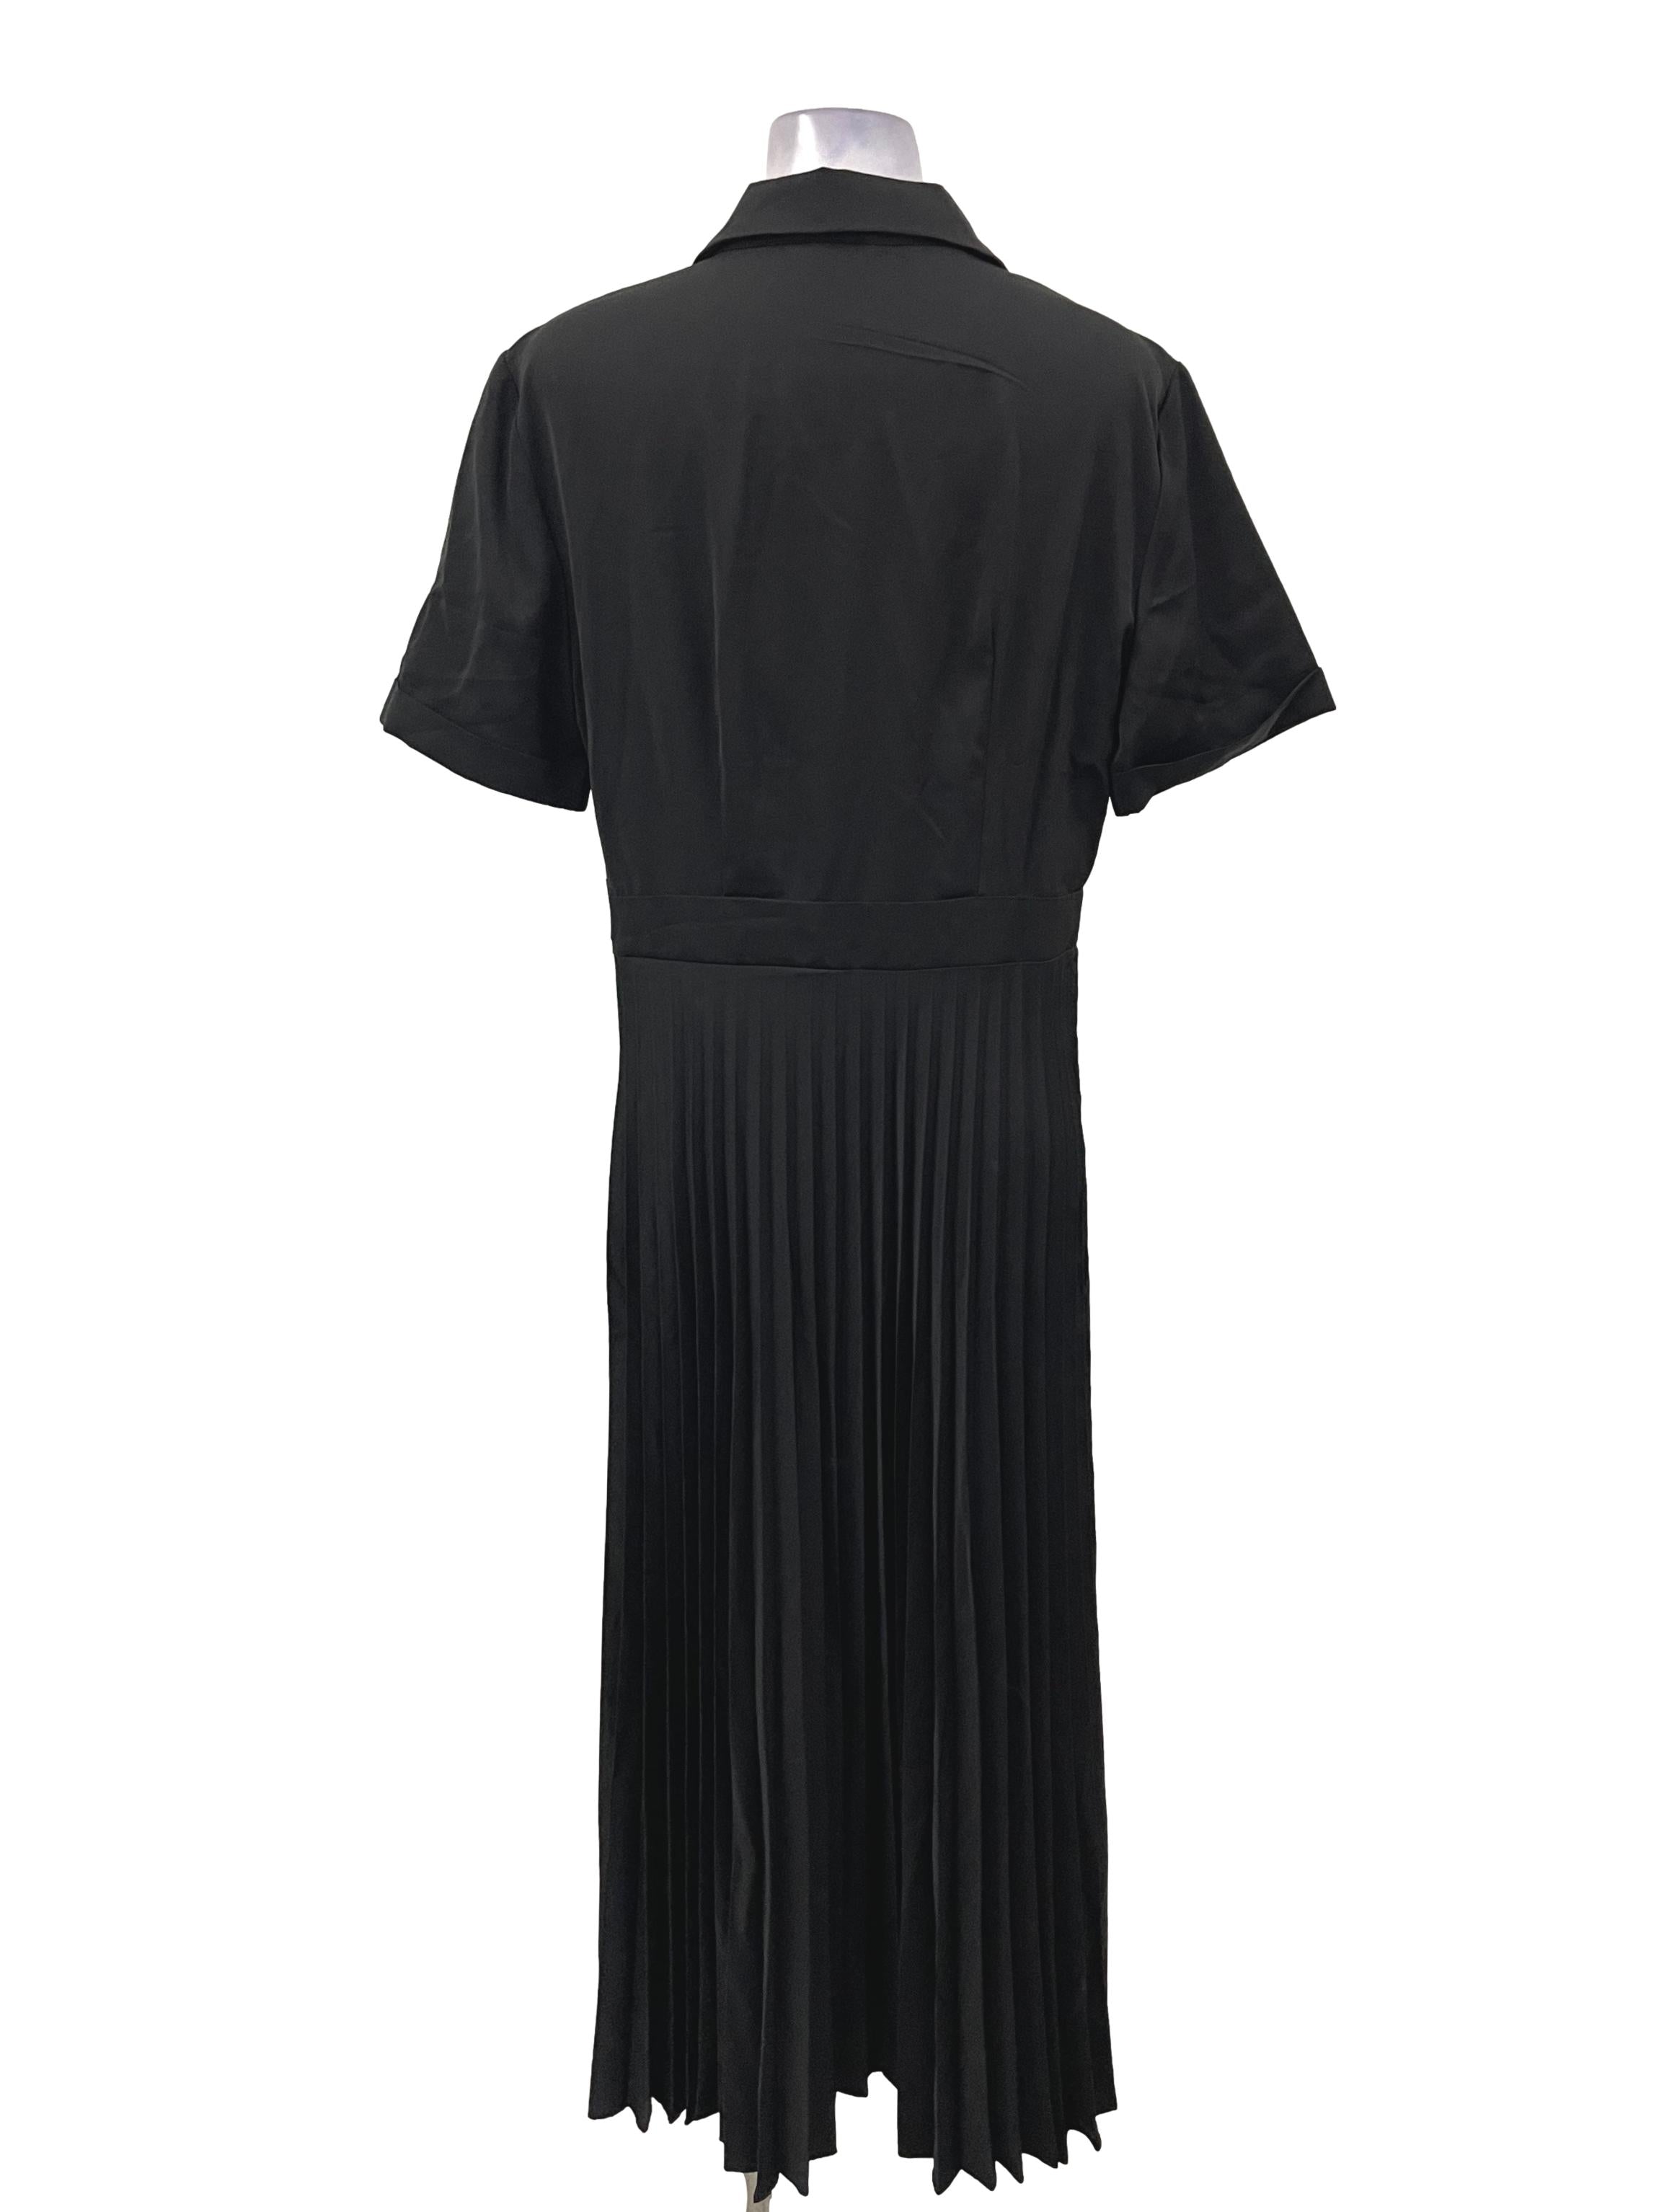 Black Pleated Collared Dress